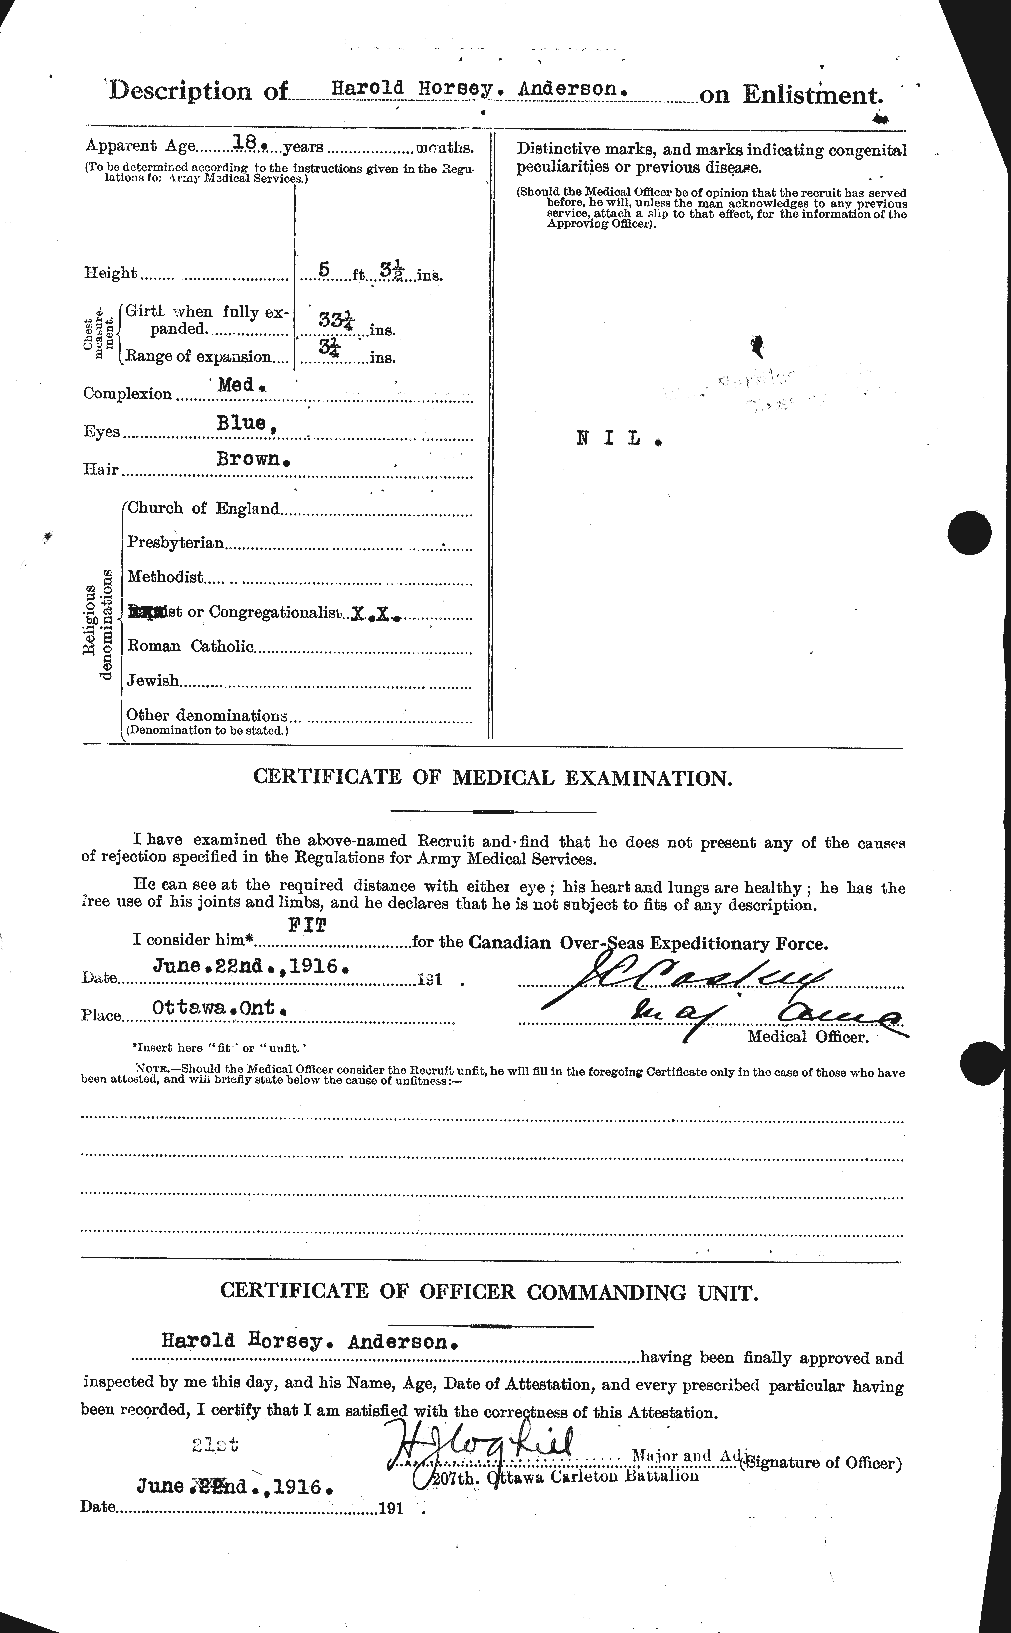 Personnel Records of the First World War - CEF 213287b